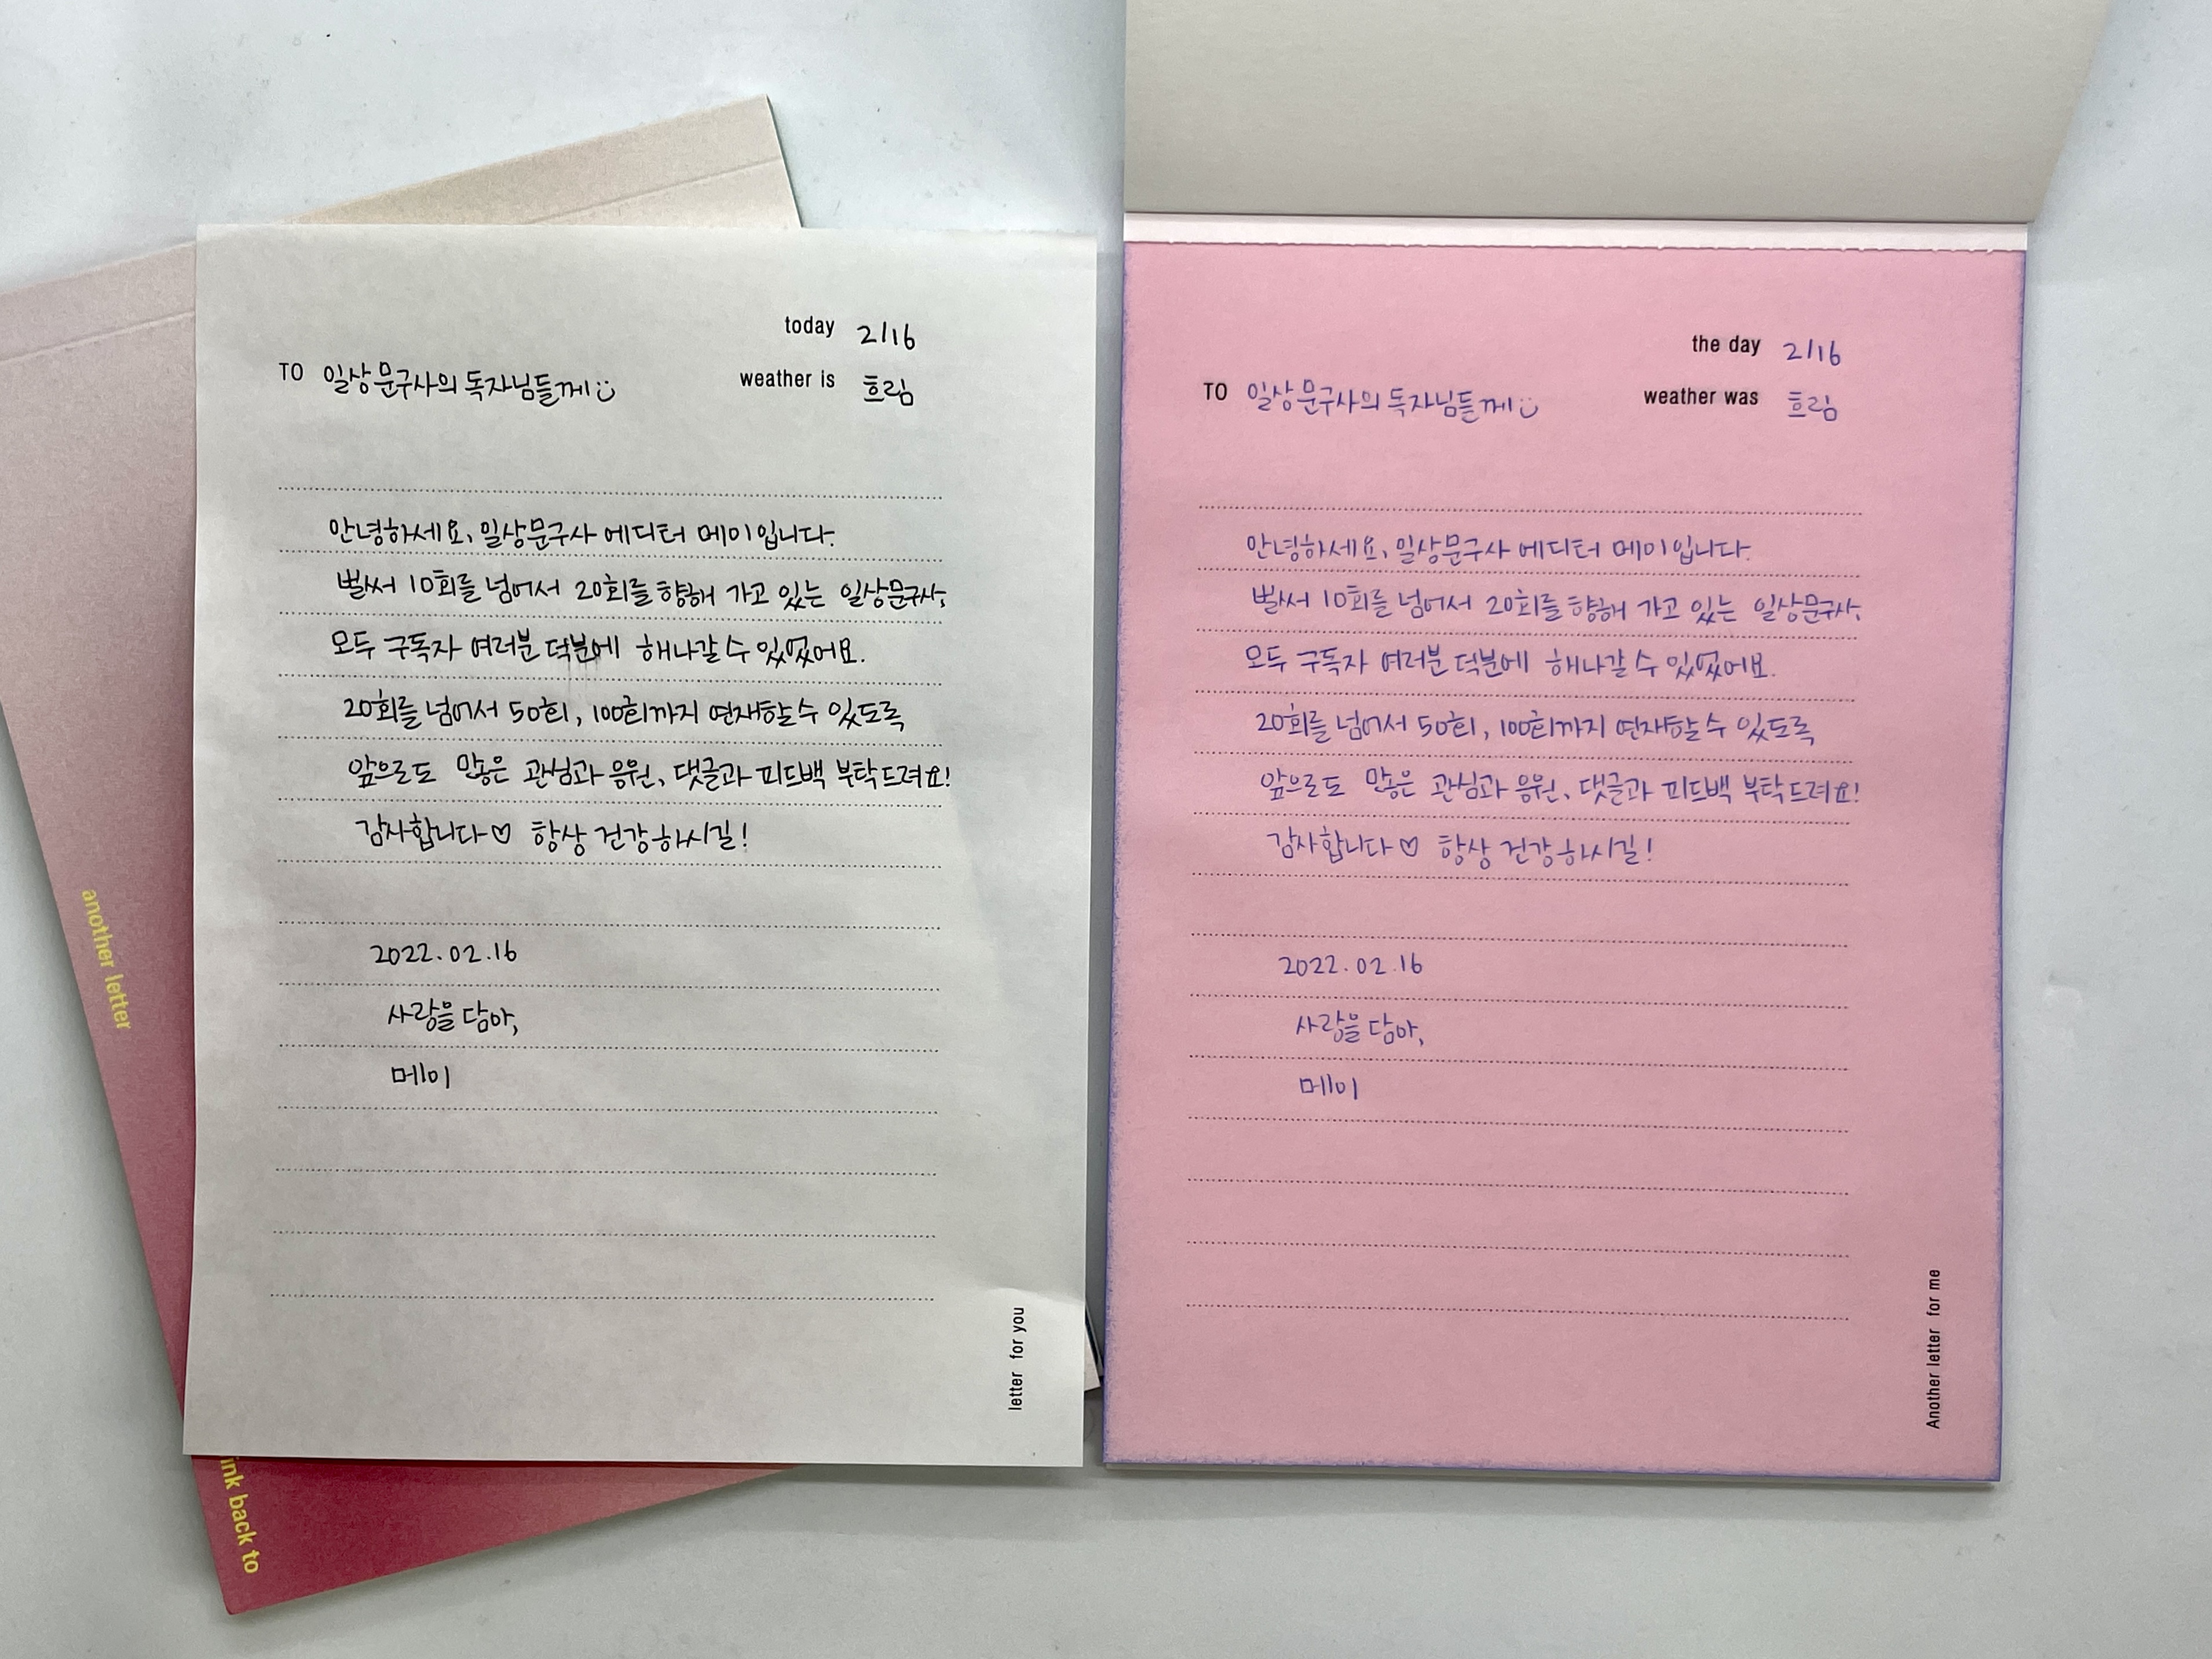 eat apology : another letter 다이어리 편지지